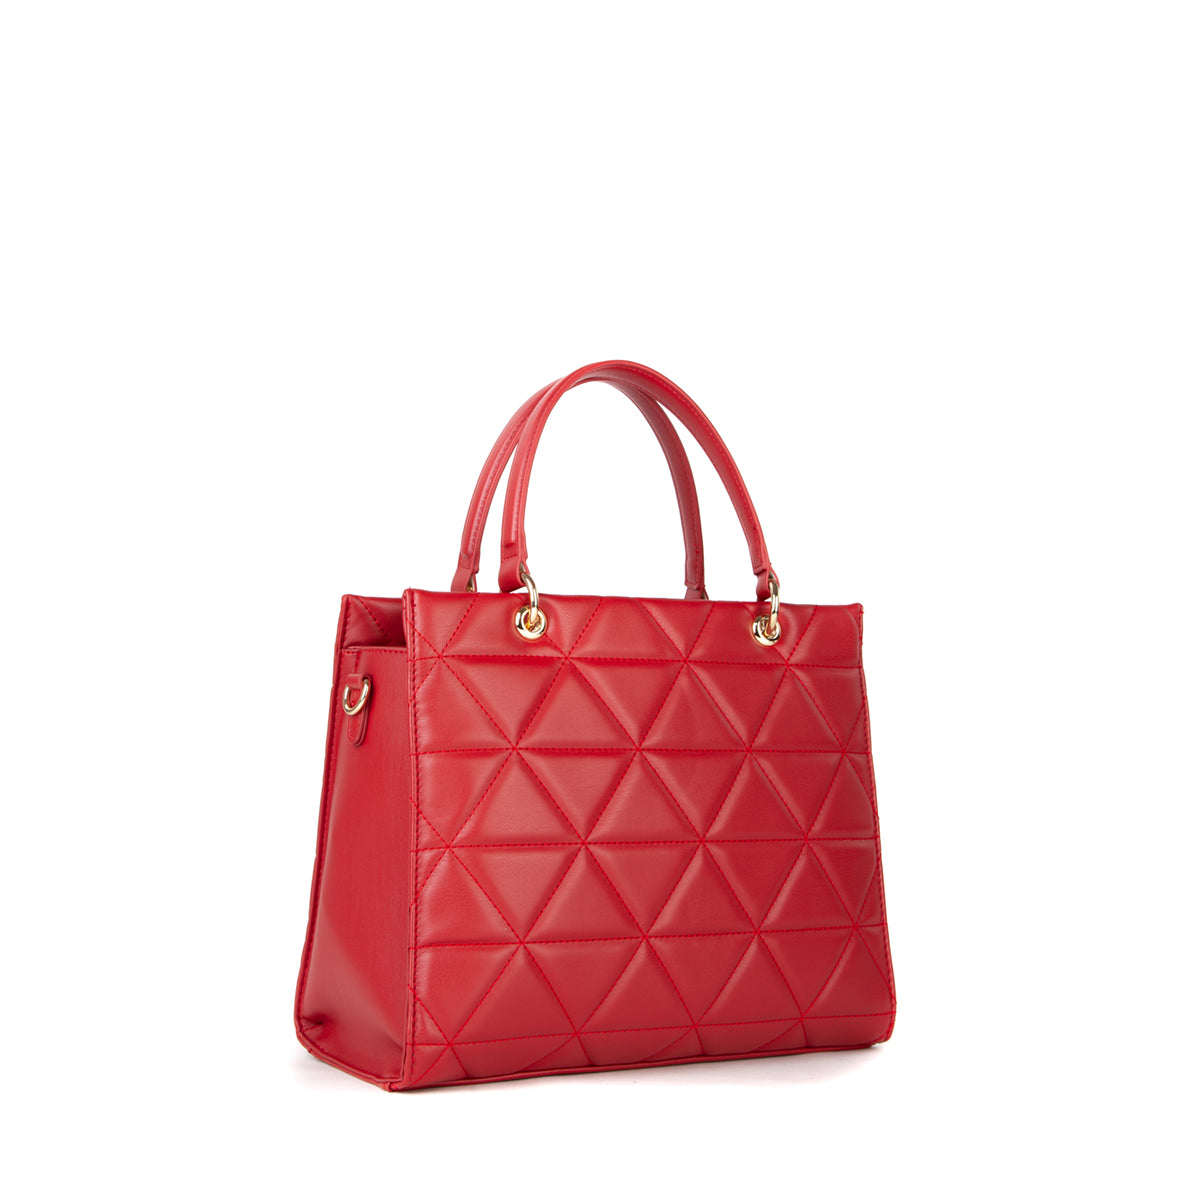 Sac Cabas Carnaby Valentino VBS7LO02 Rosso